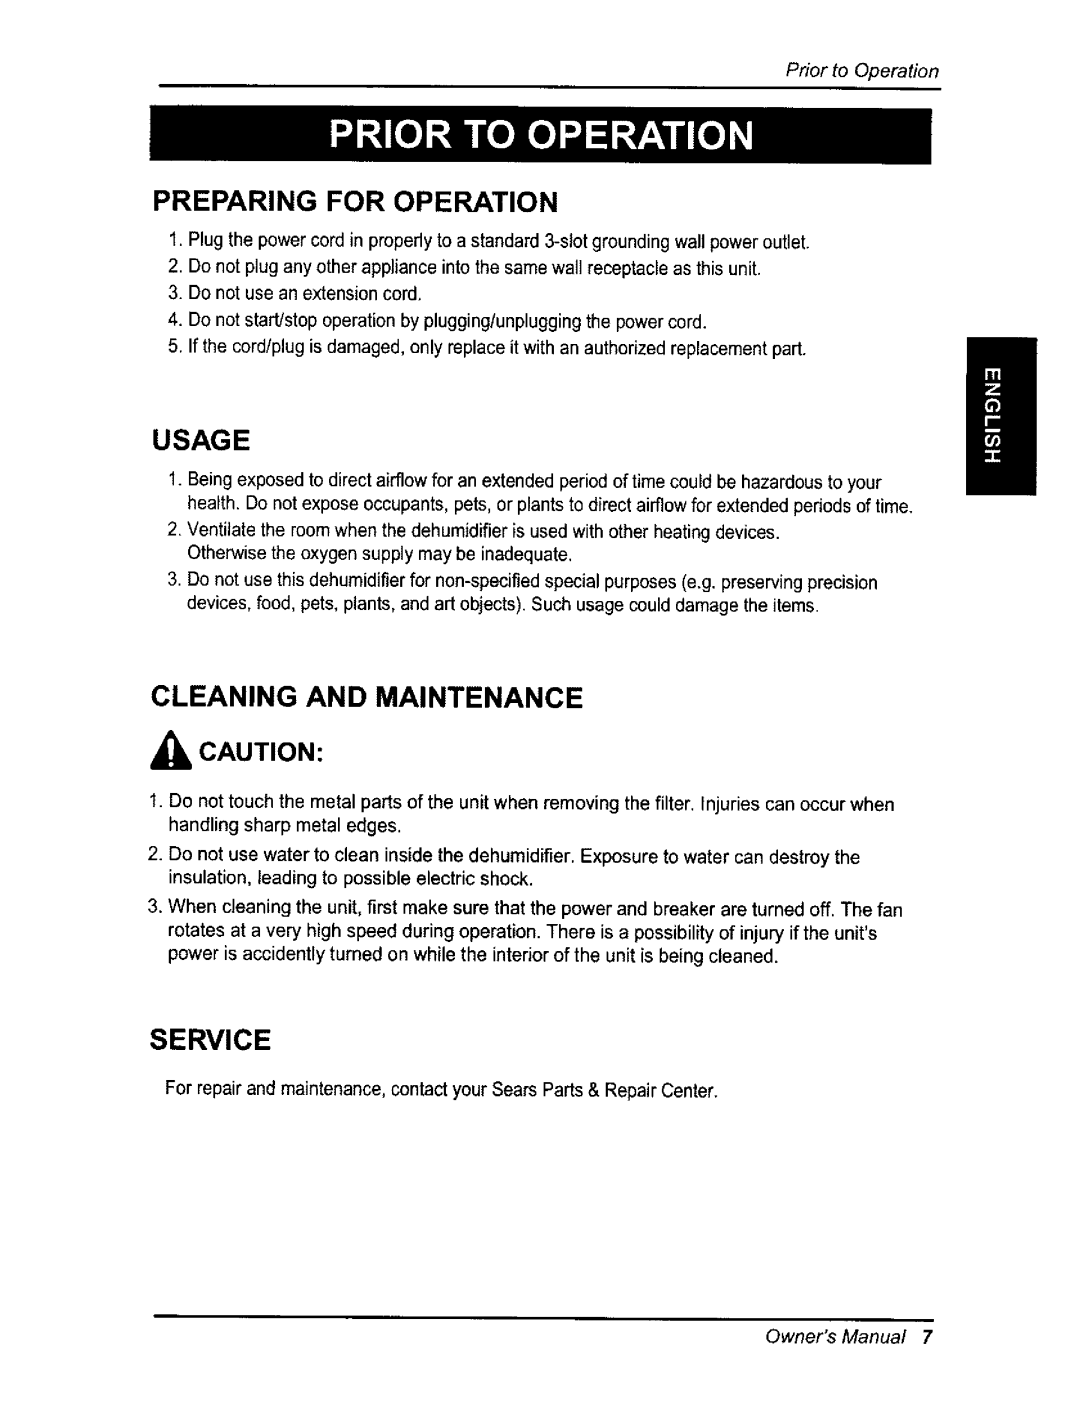 Kenmore 580.54701 owner manual Preparing For Operation, Usage, Cleaning And Maintenance, Service 